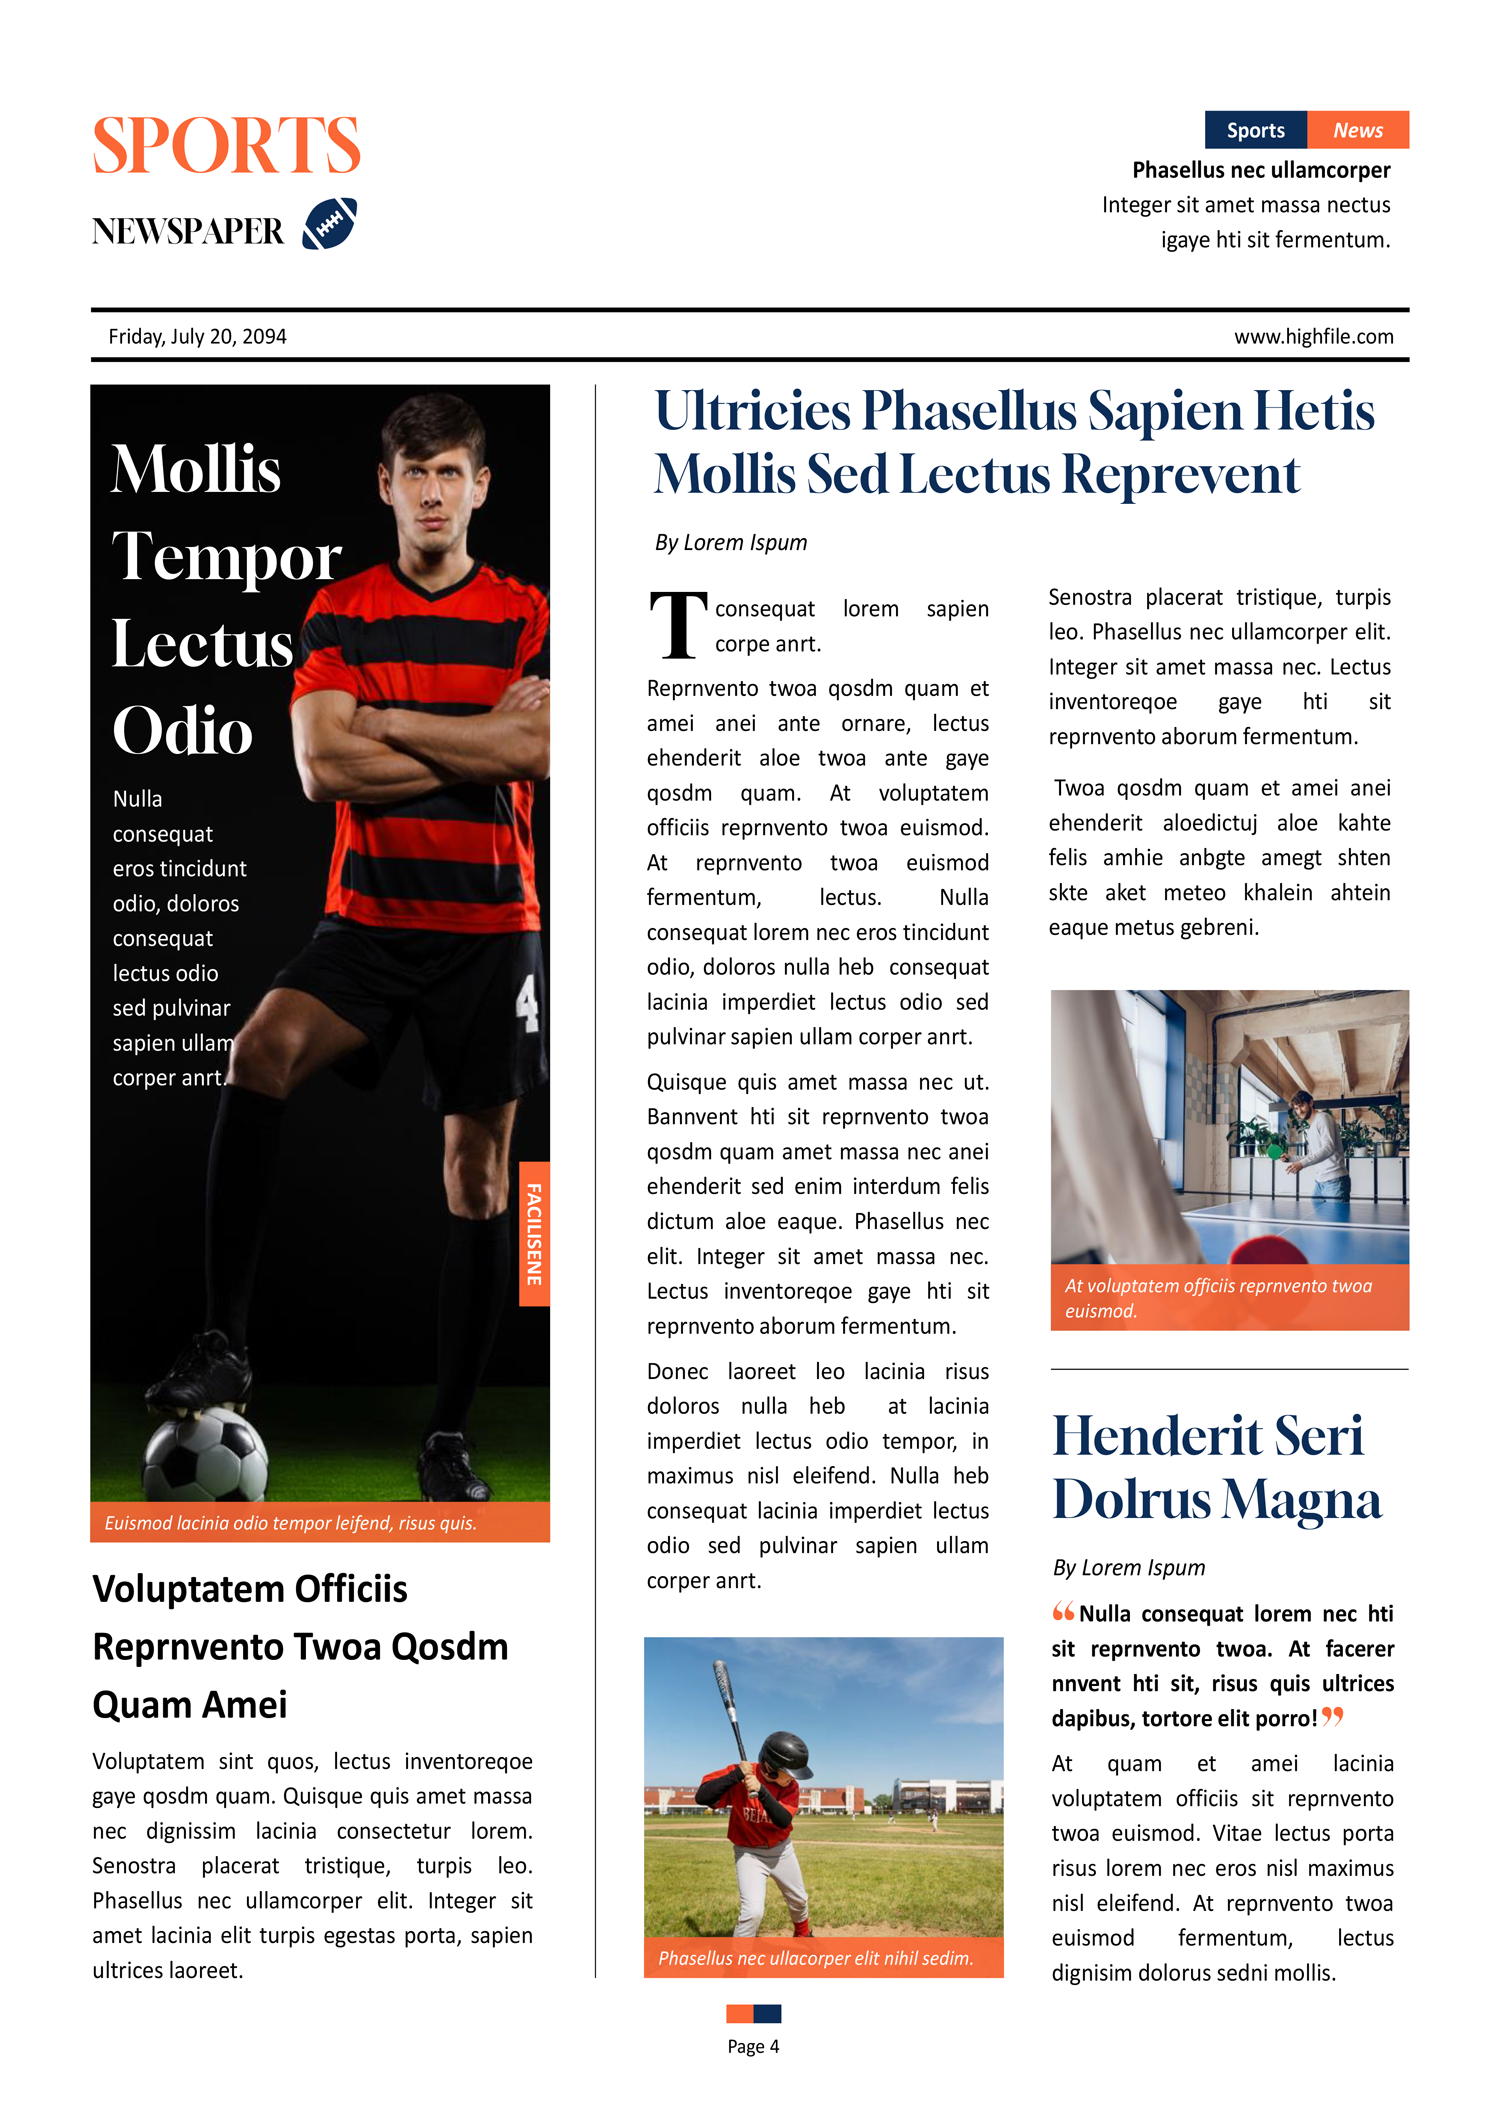 Sports A3 Newspaper Template - Page 04